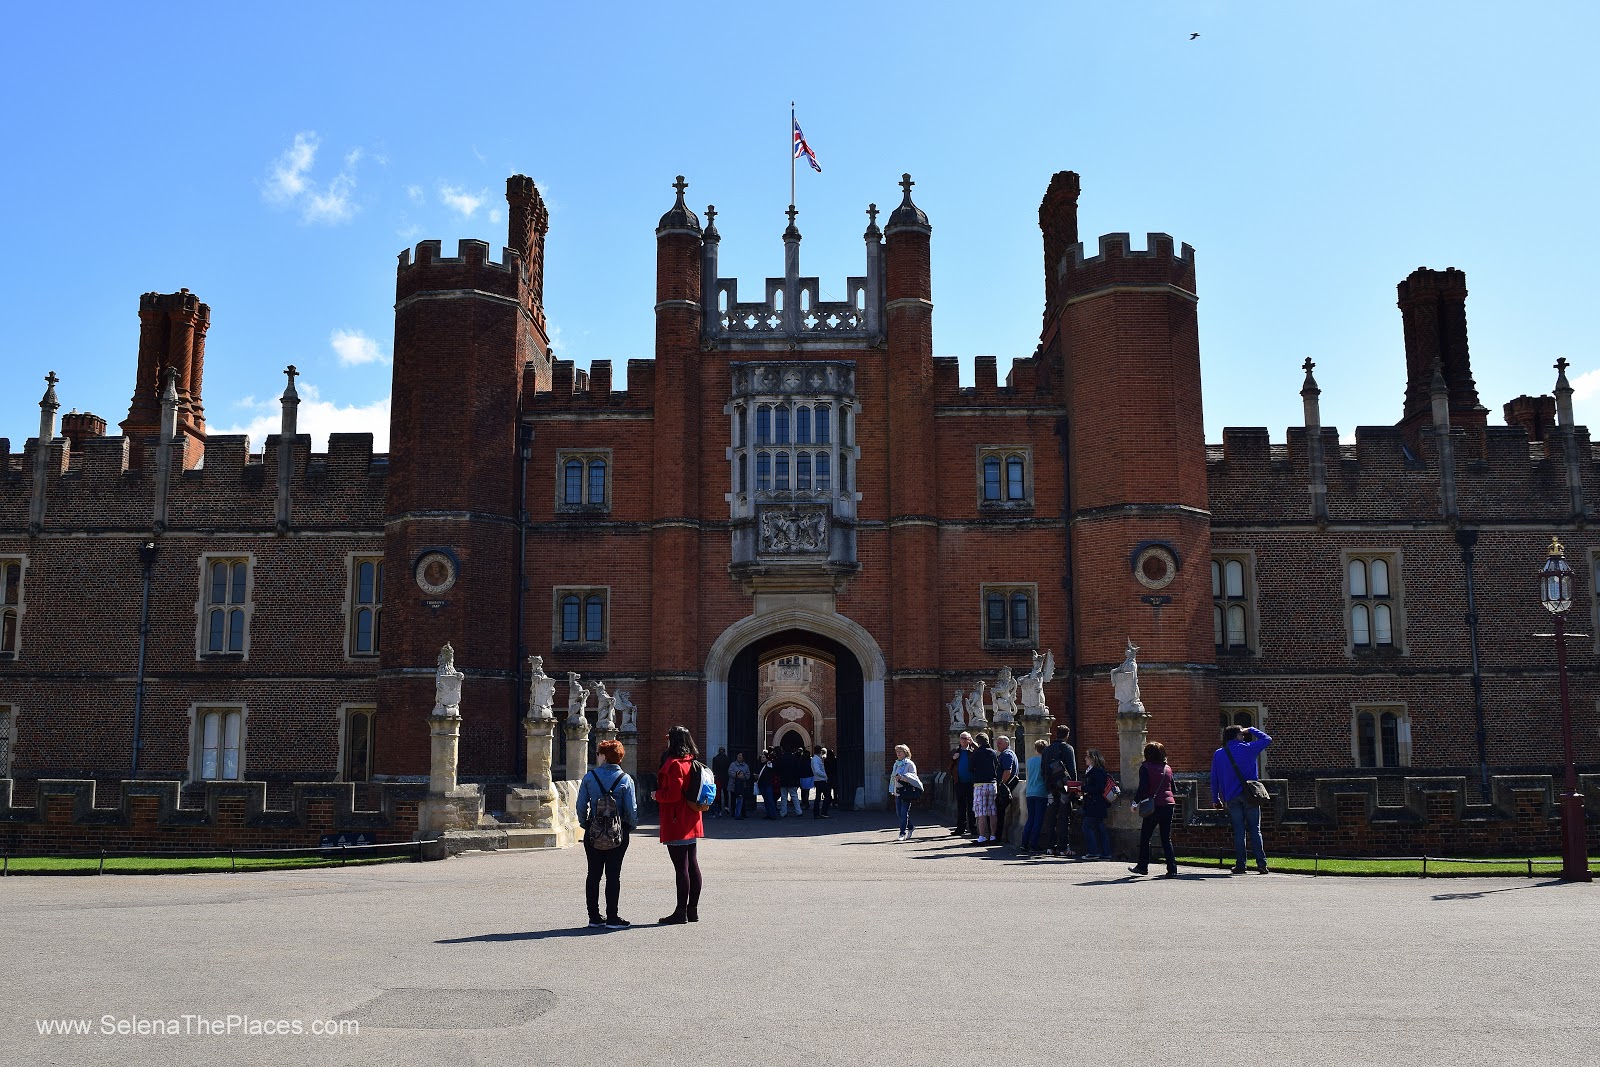 A day at Hampton Court